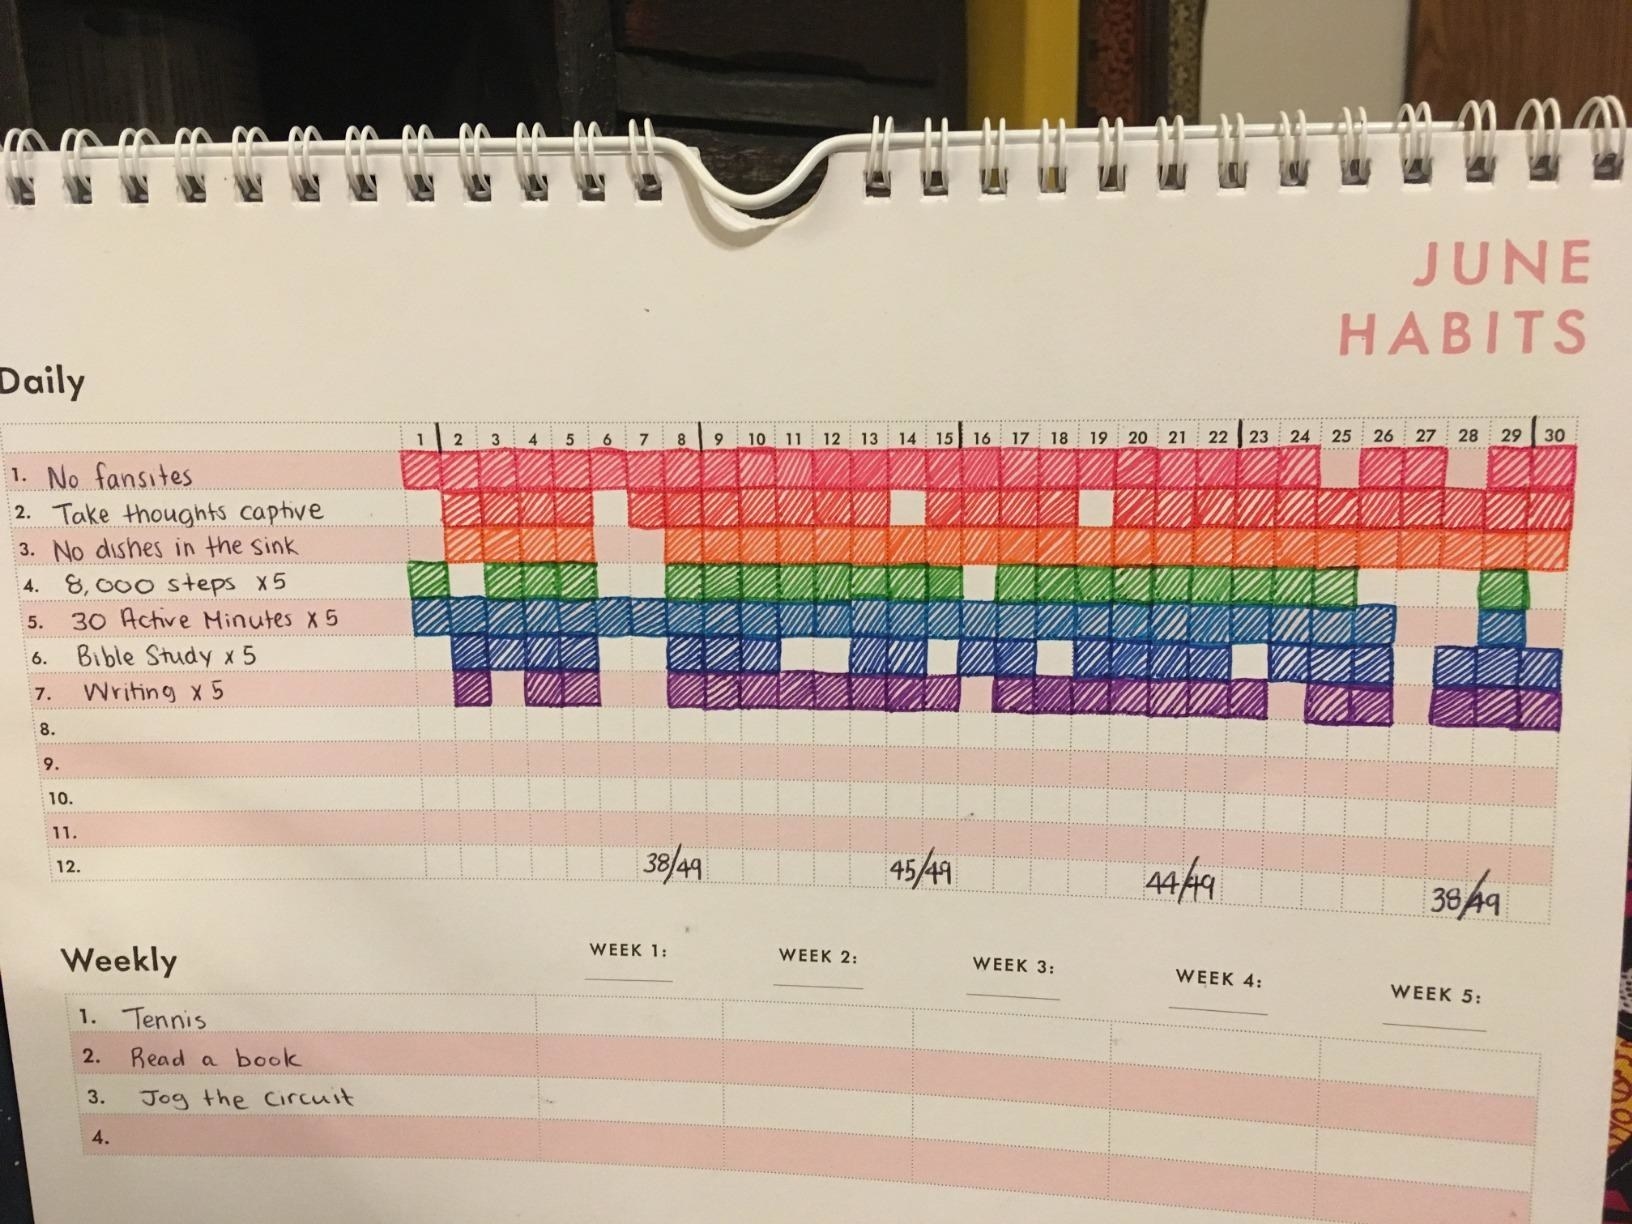 Reviewer photo of the habit tracker filled out